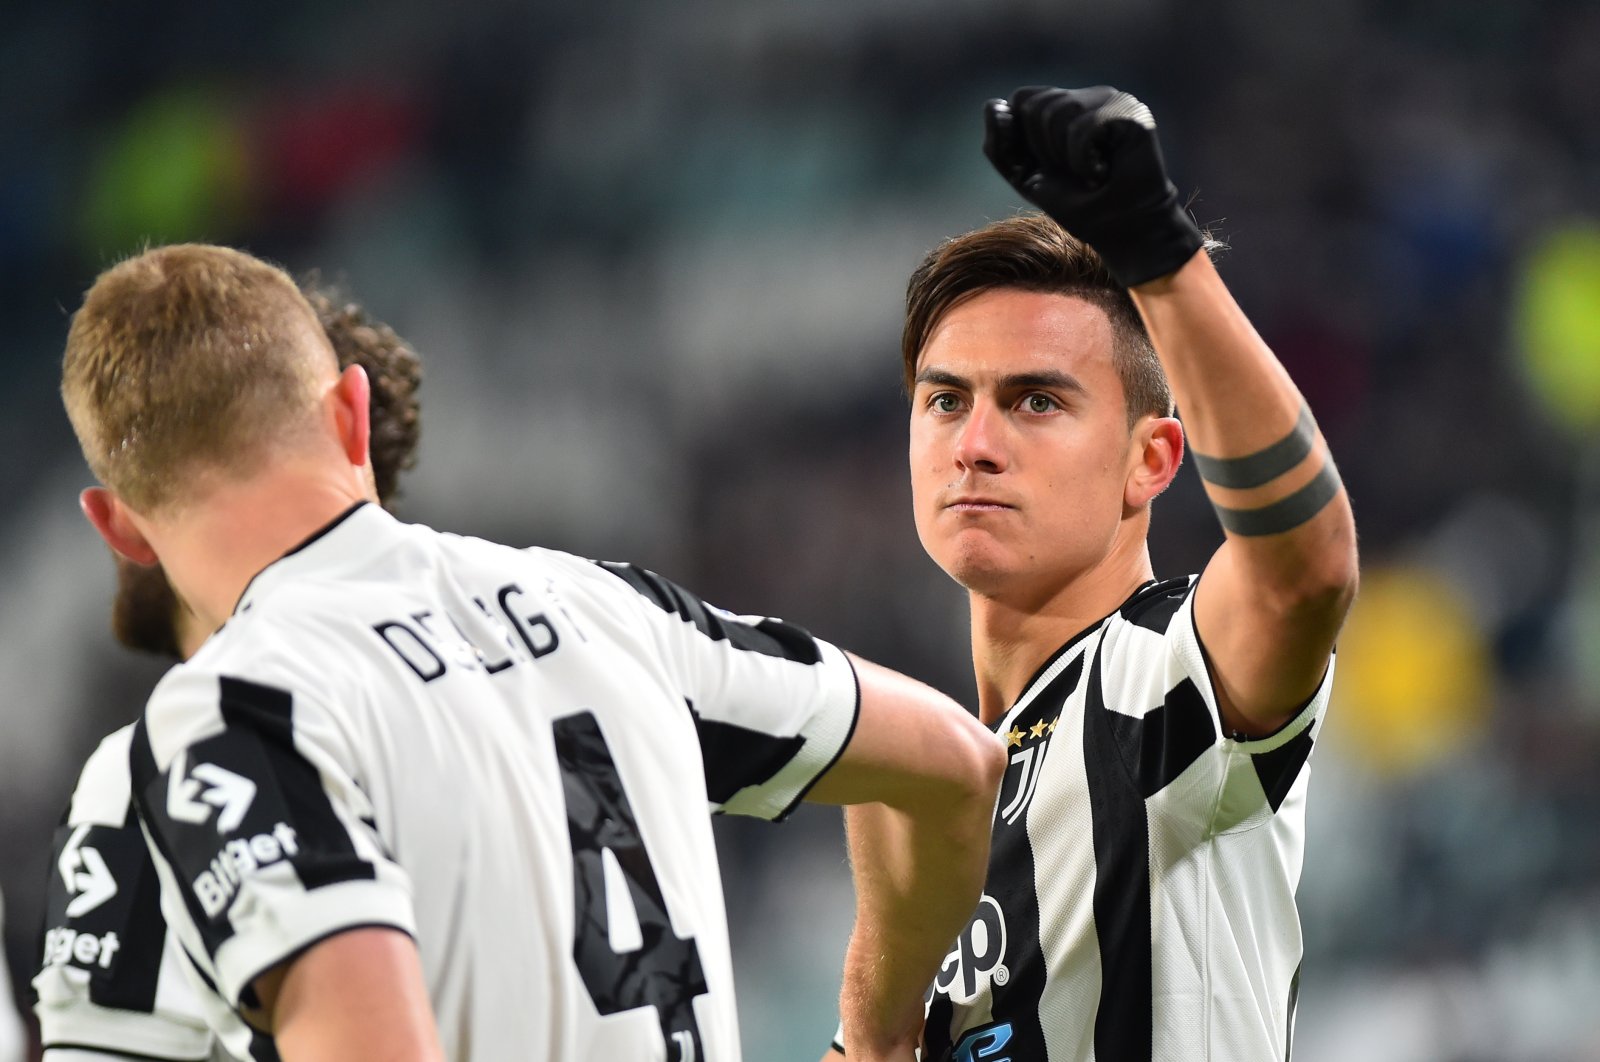  Juventus&#039; Paulo Dybala (R) celebrates a goal during a Serie A match against Genoa at the Allianz Stadium in Turin, Italy, Dec. 5, 2021. (Reuters Photo)